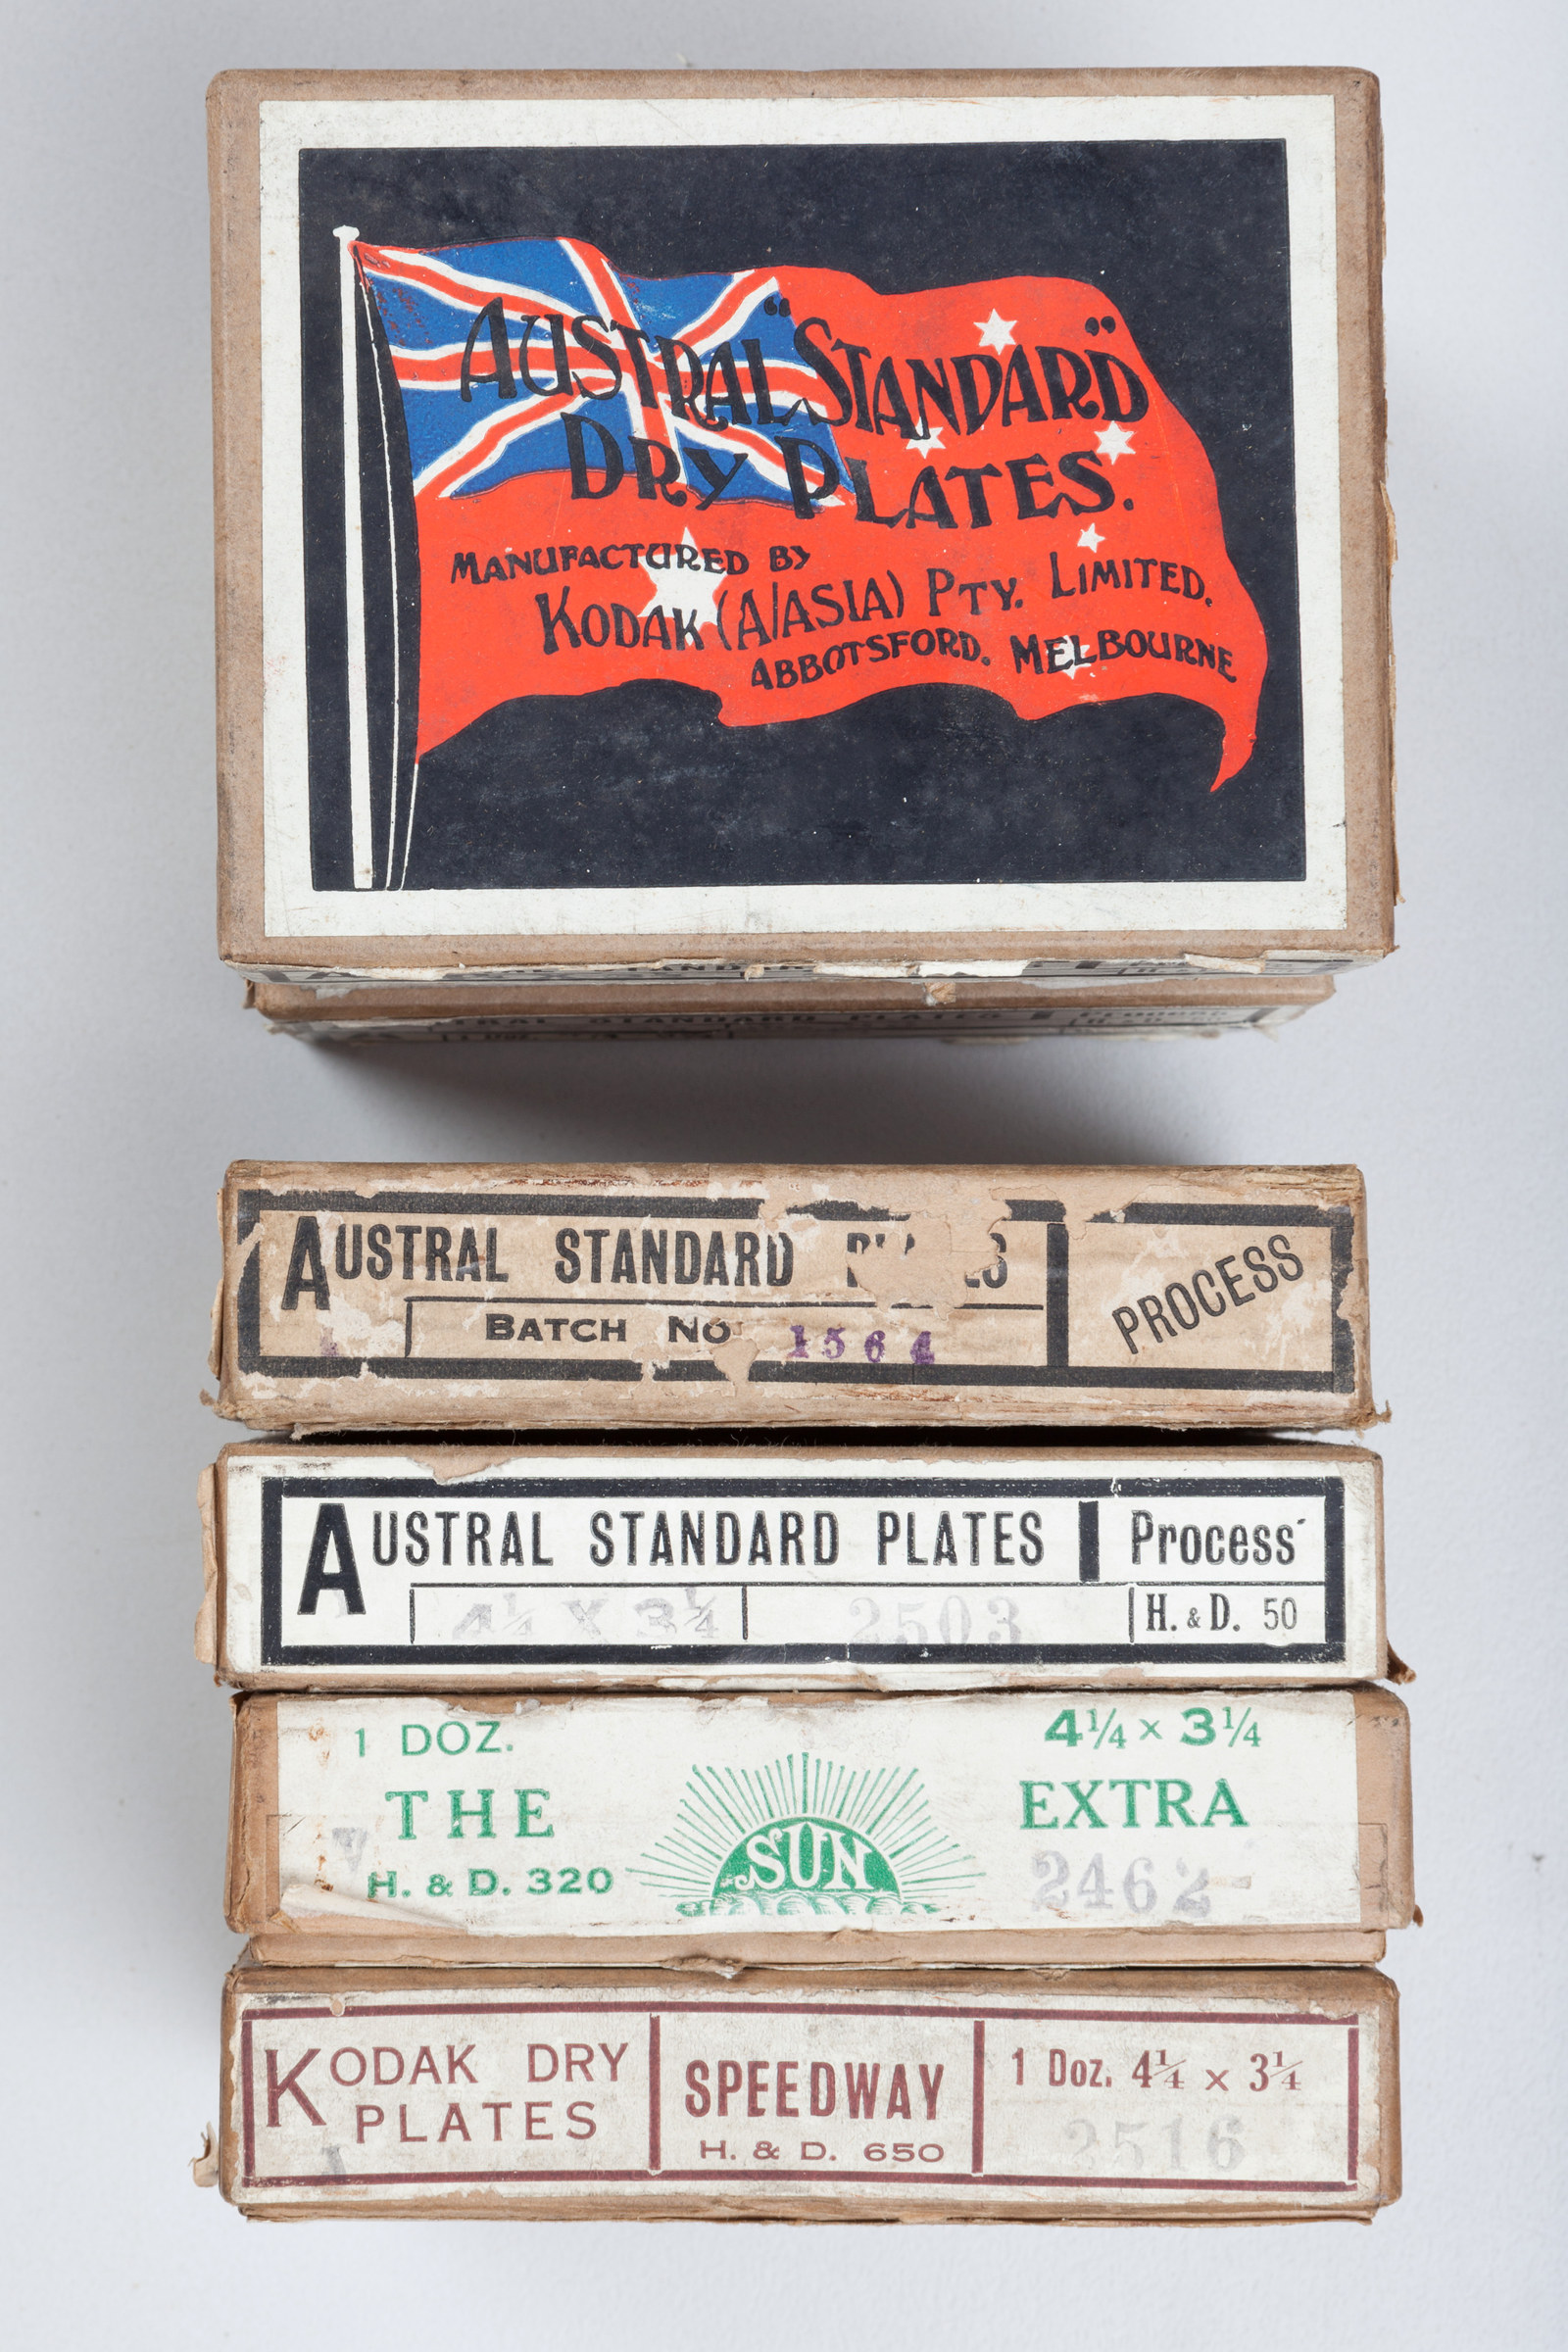 Original boxes of Austral and Kodak brand glass plates, 3.25 x 4.25 inches in size